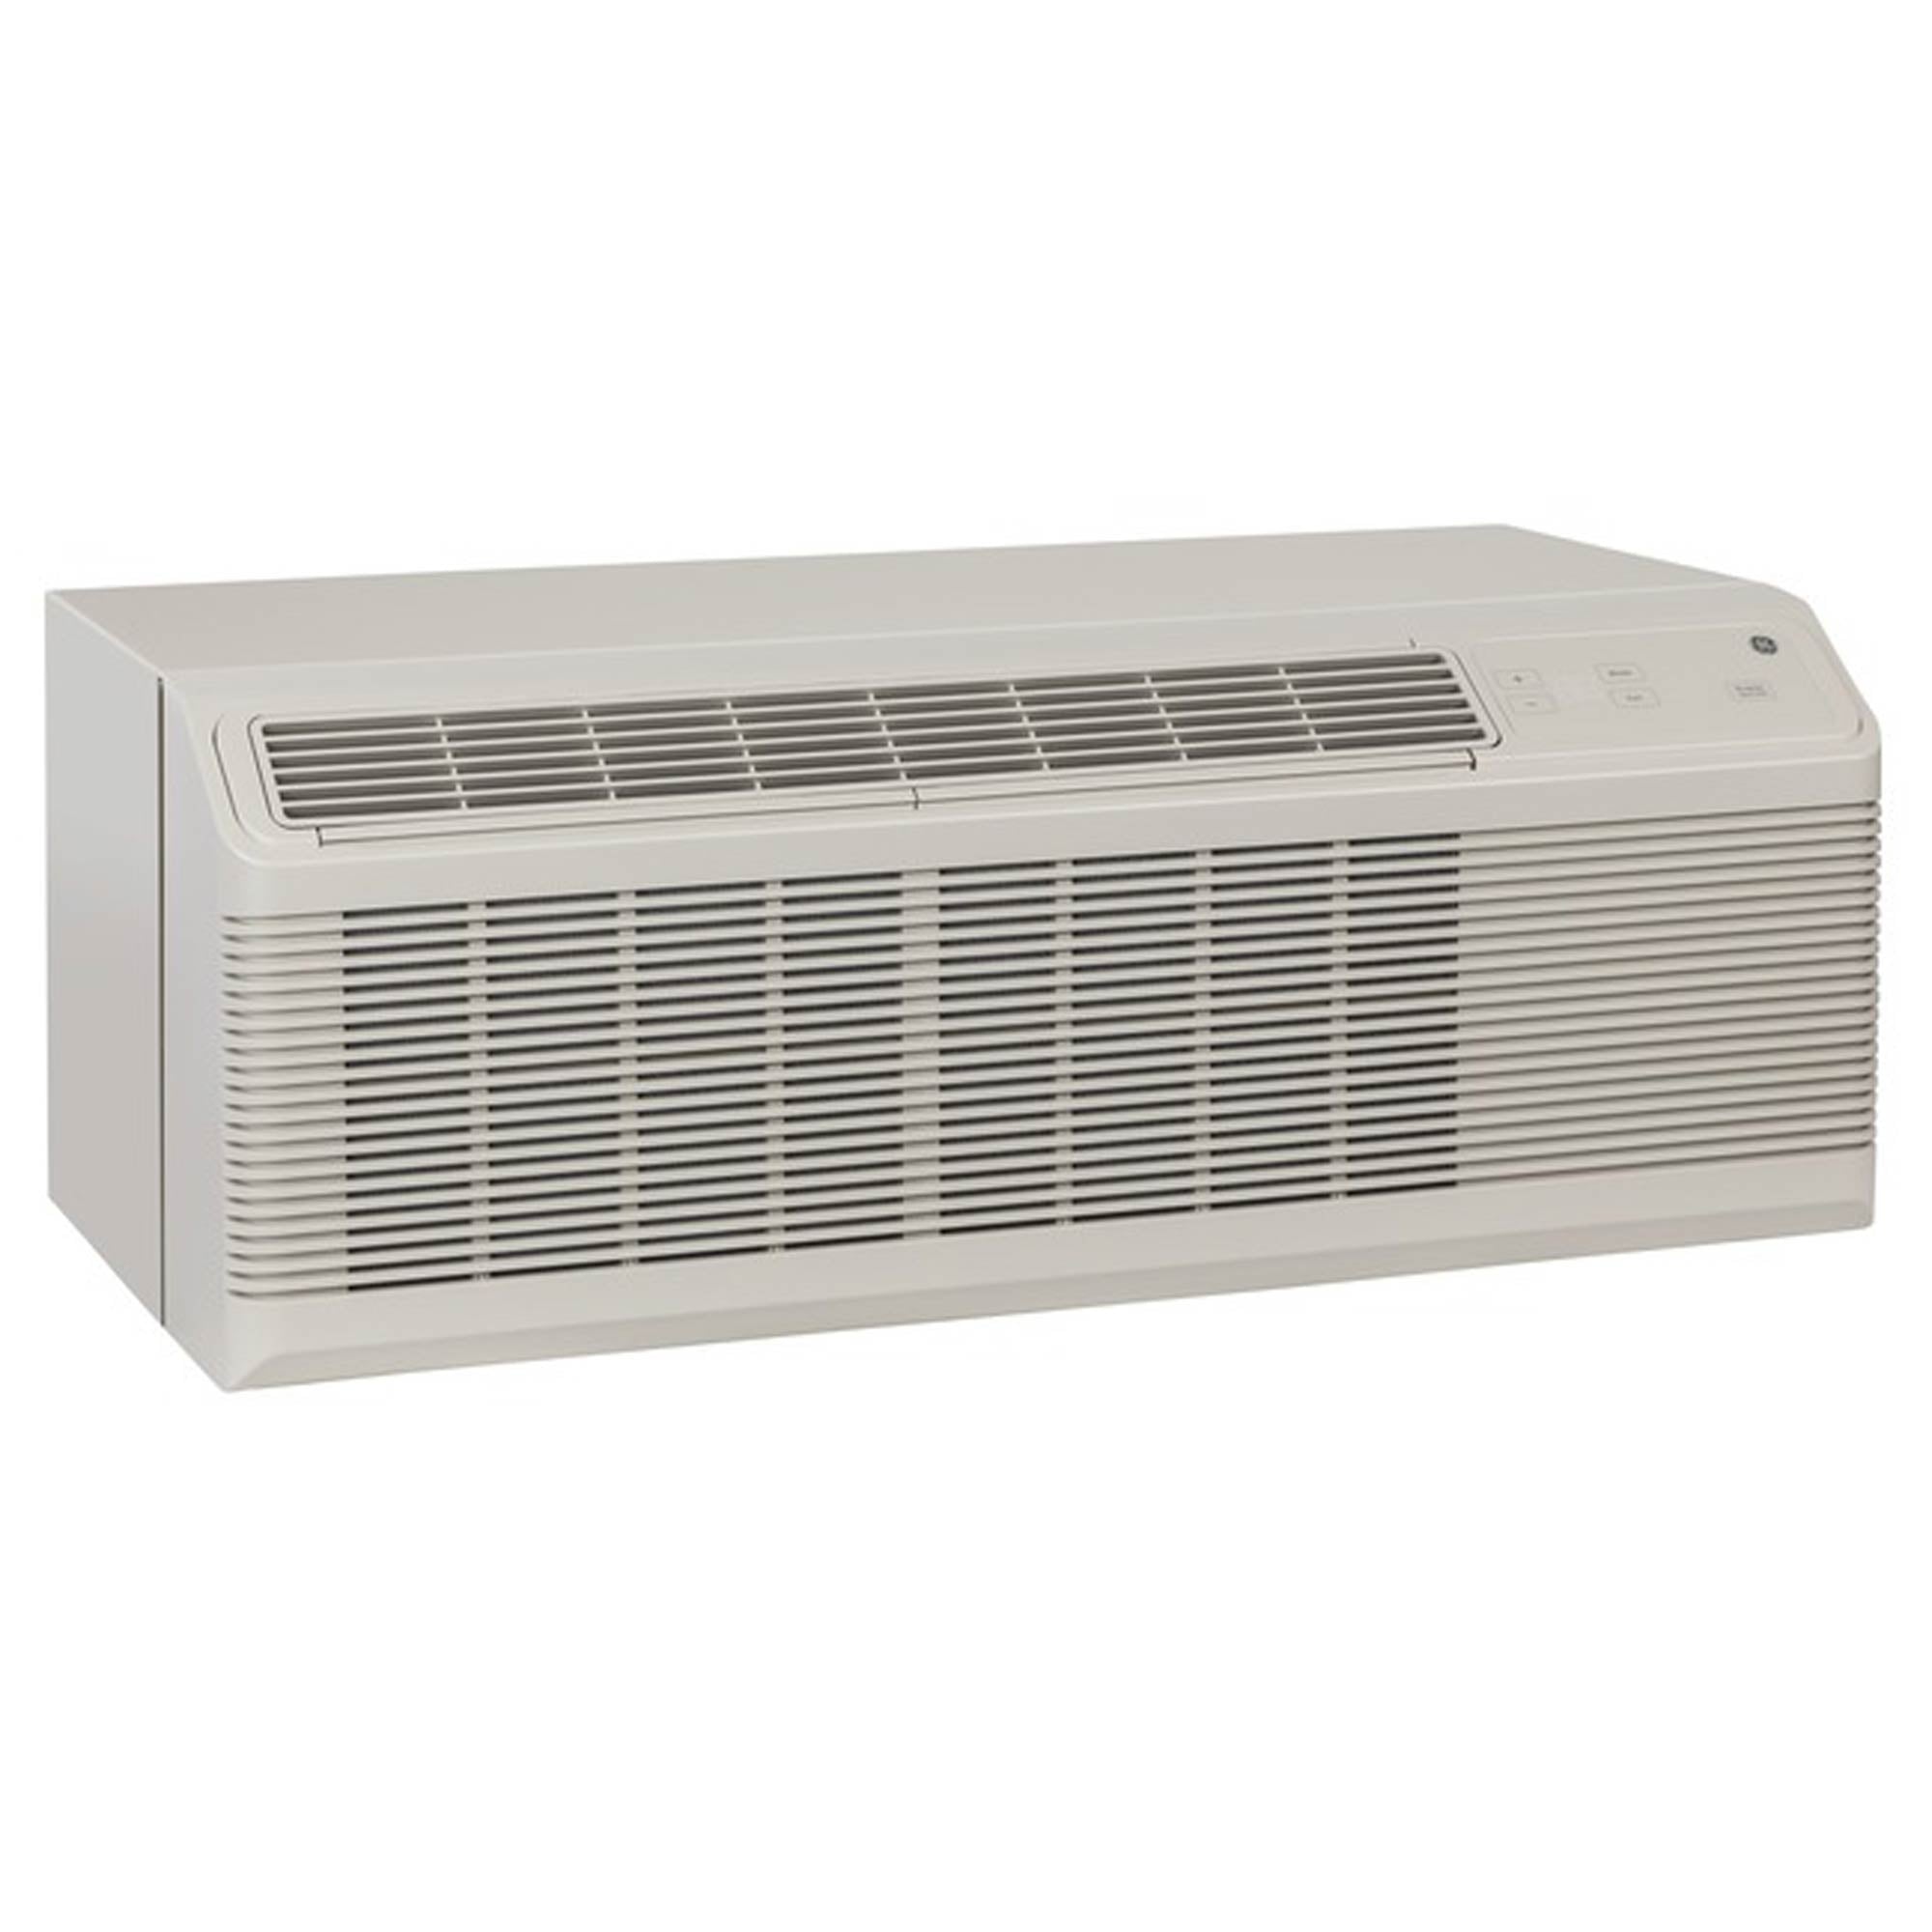 GE Zoneline 11,900/11,800 BTU PTAC Heat Pump with Corrosion Protection